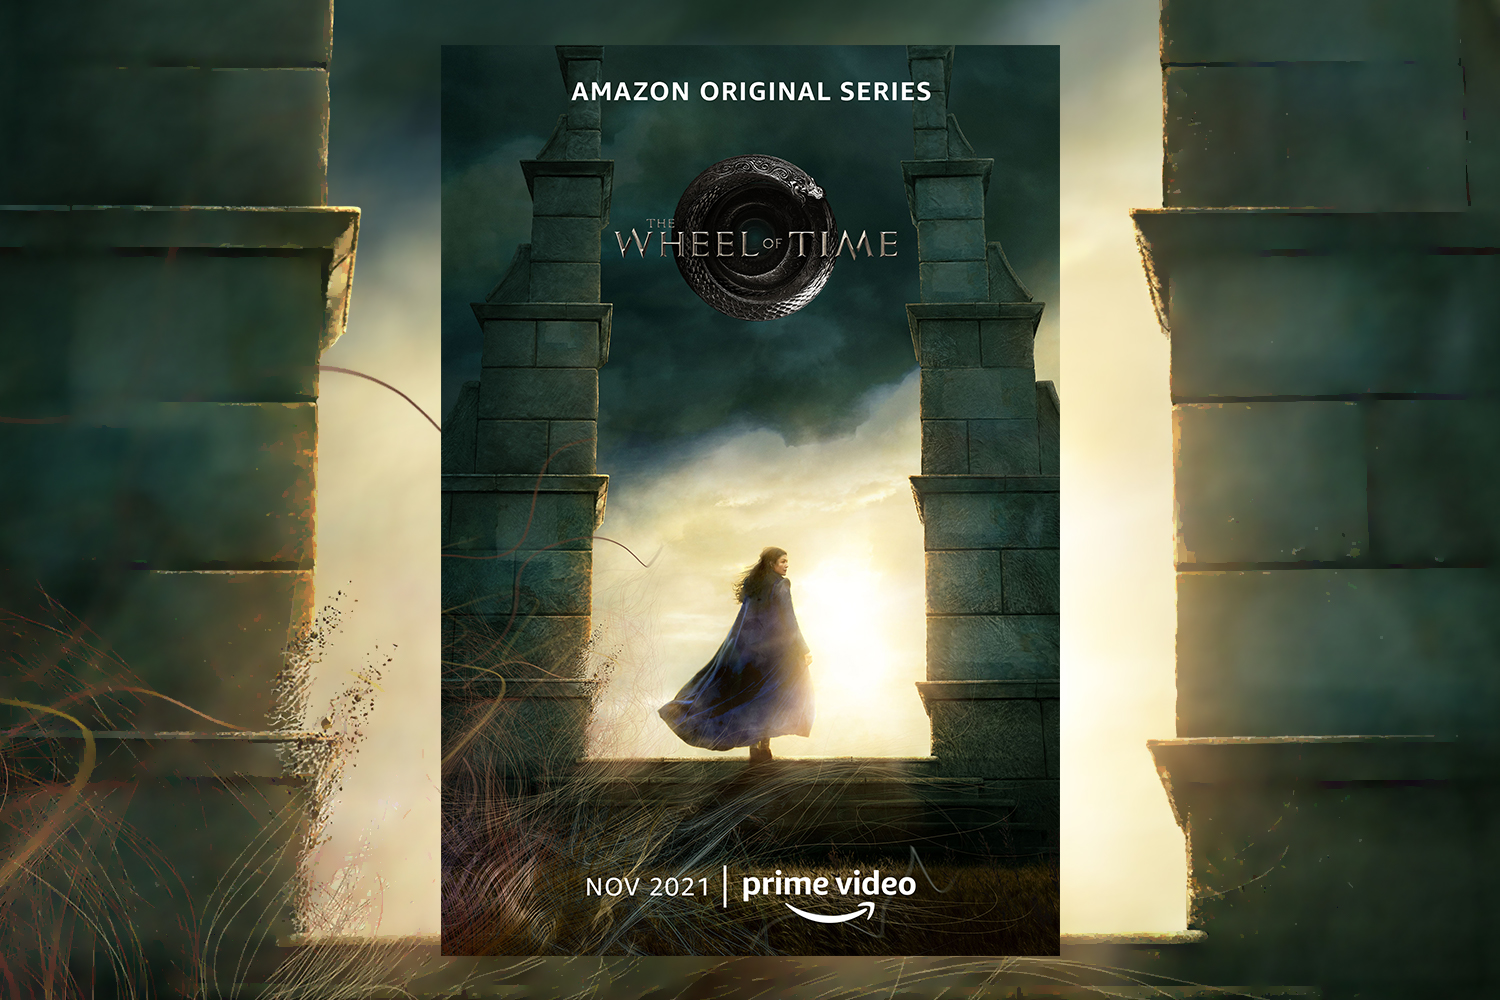 A poster for the new Amazon Original Series "The Wheel of Time," which will debut on Prime Video in November. It's based on Robert Jordan's high fantasy book series.